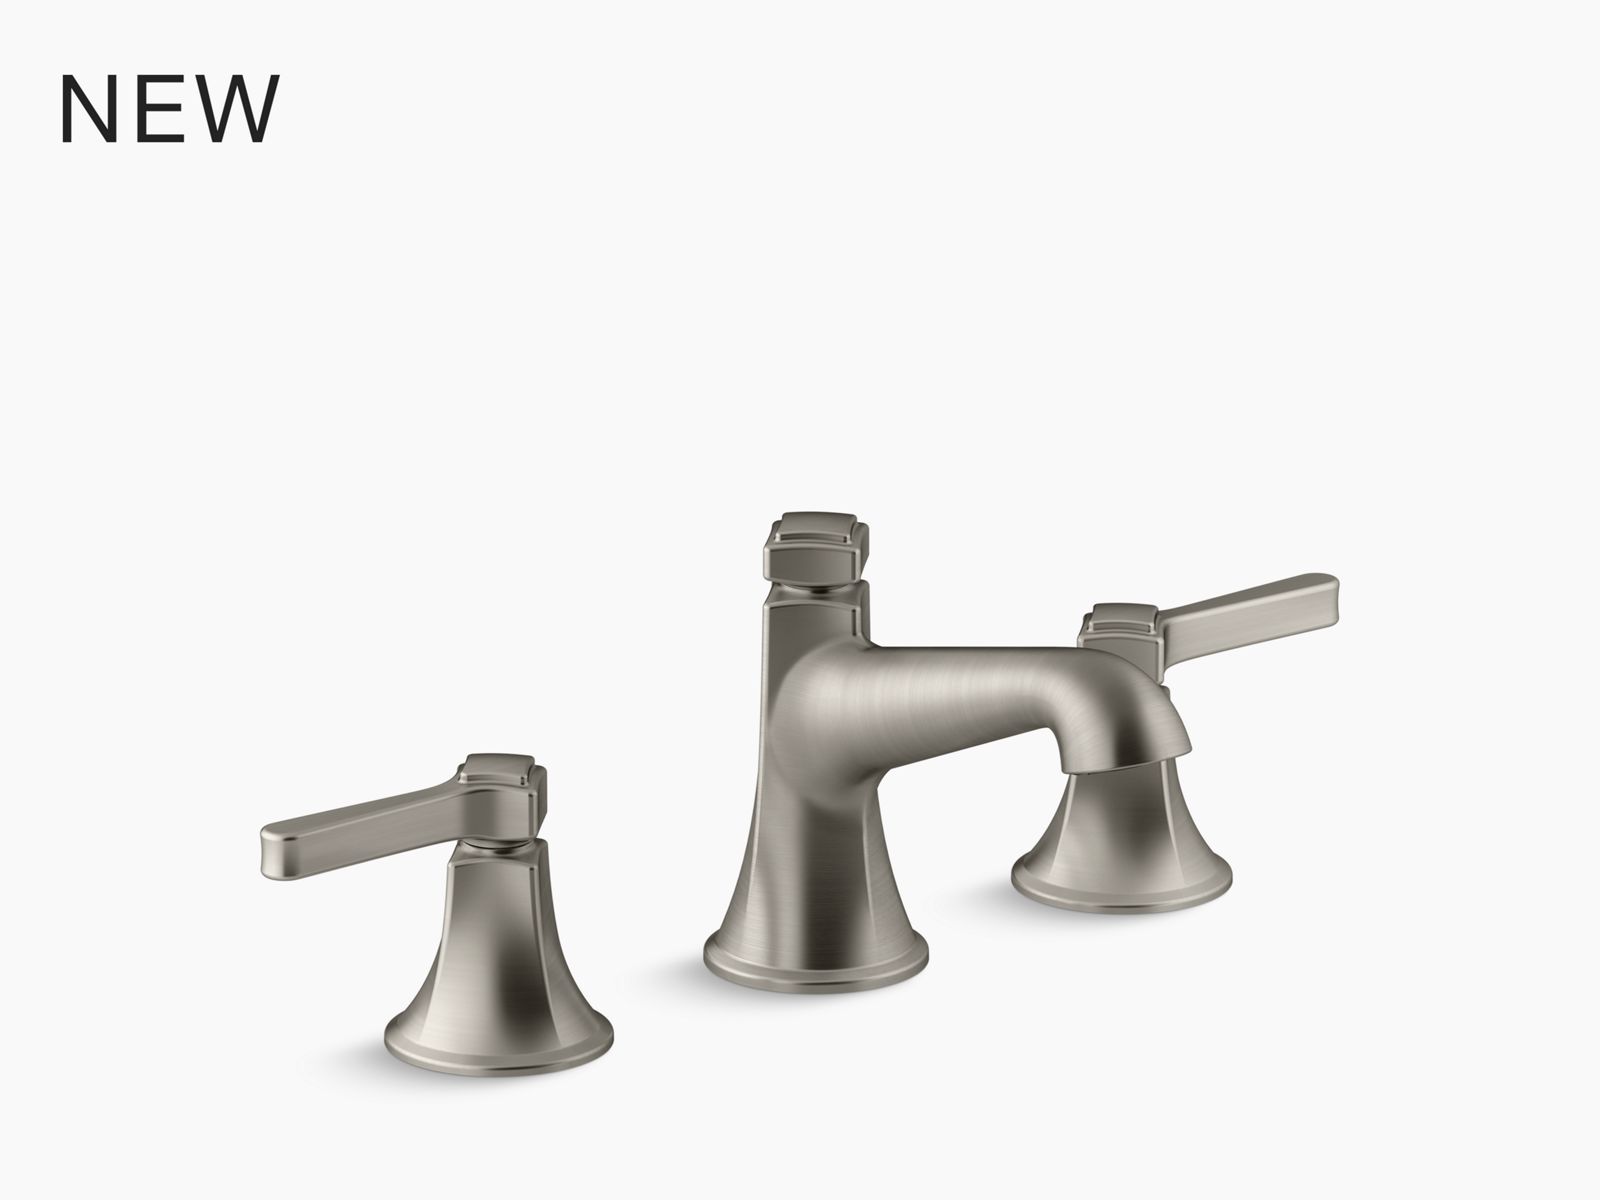 K T312 4m Finial Traditional Rite Temp Bath And Shower Faucet